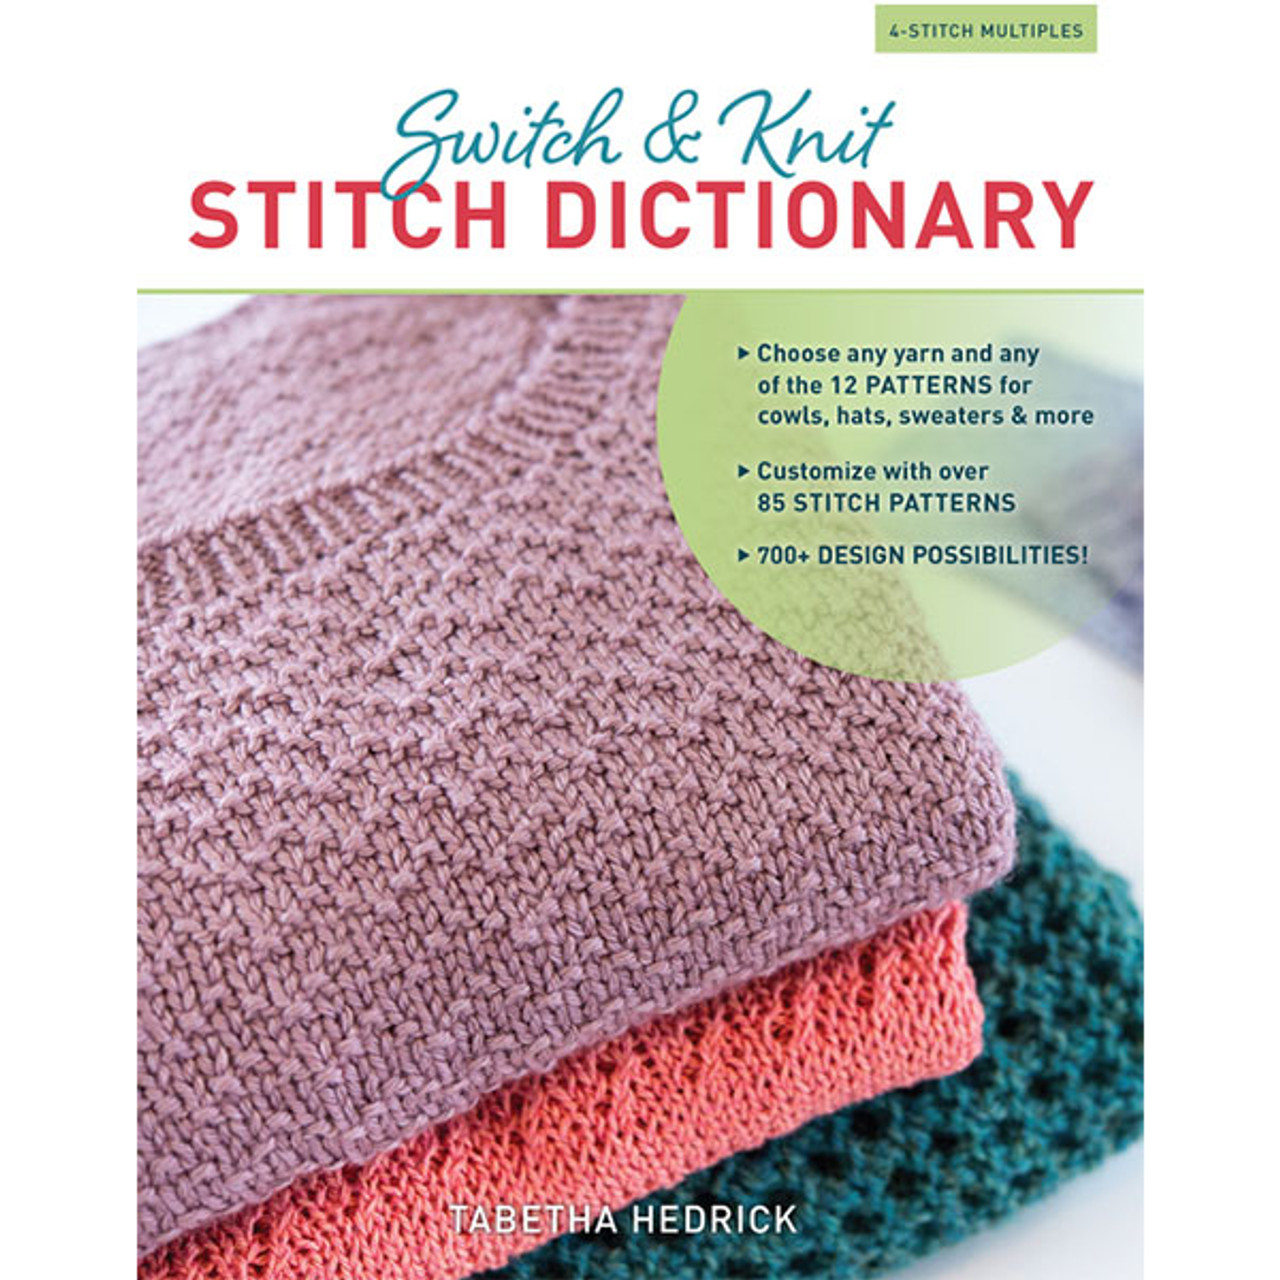 Crochet Stitch Dictionary - Book Review - One of the Best Crochet Stitch  Books Printed. 